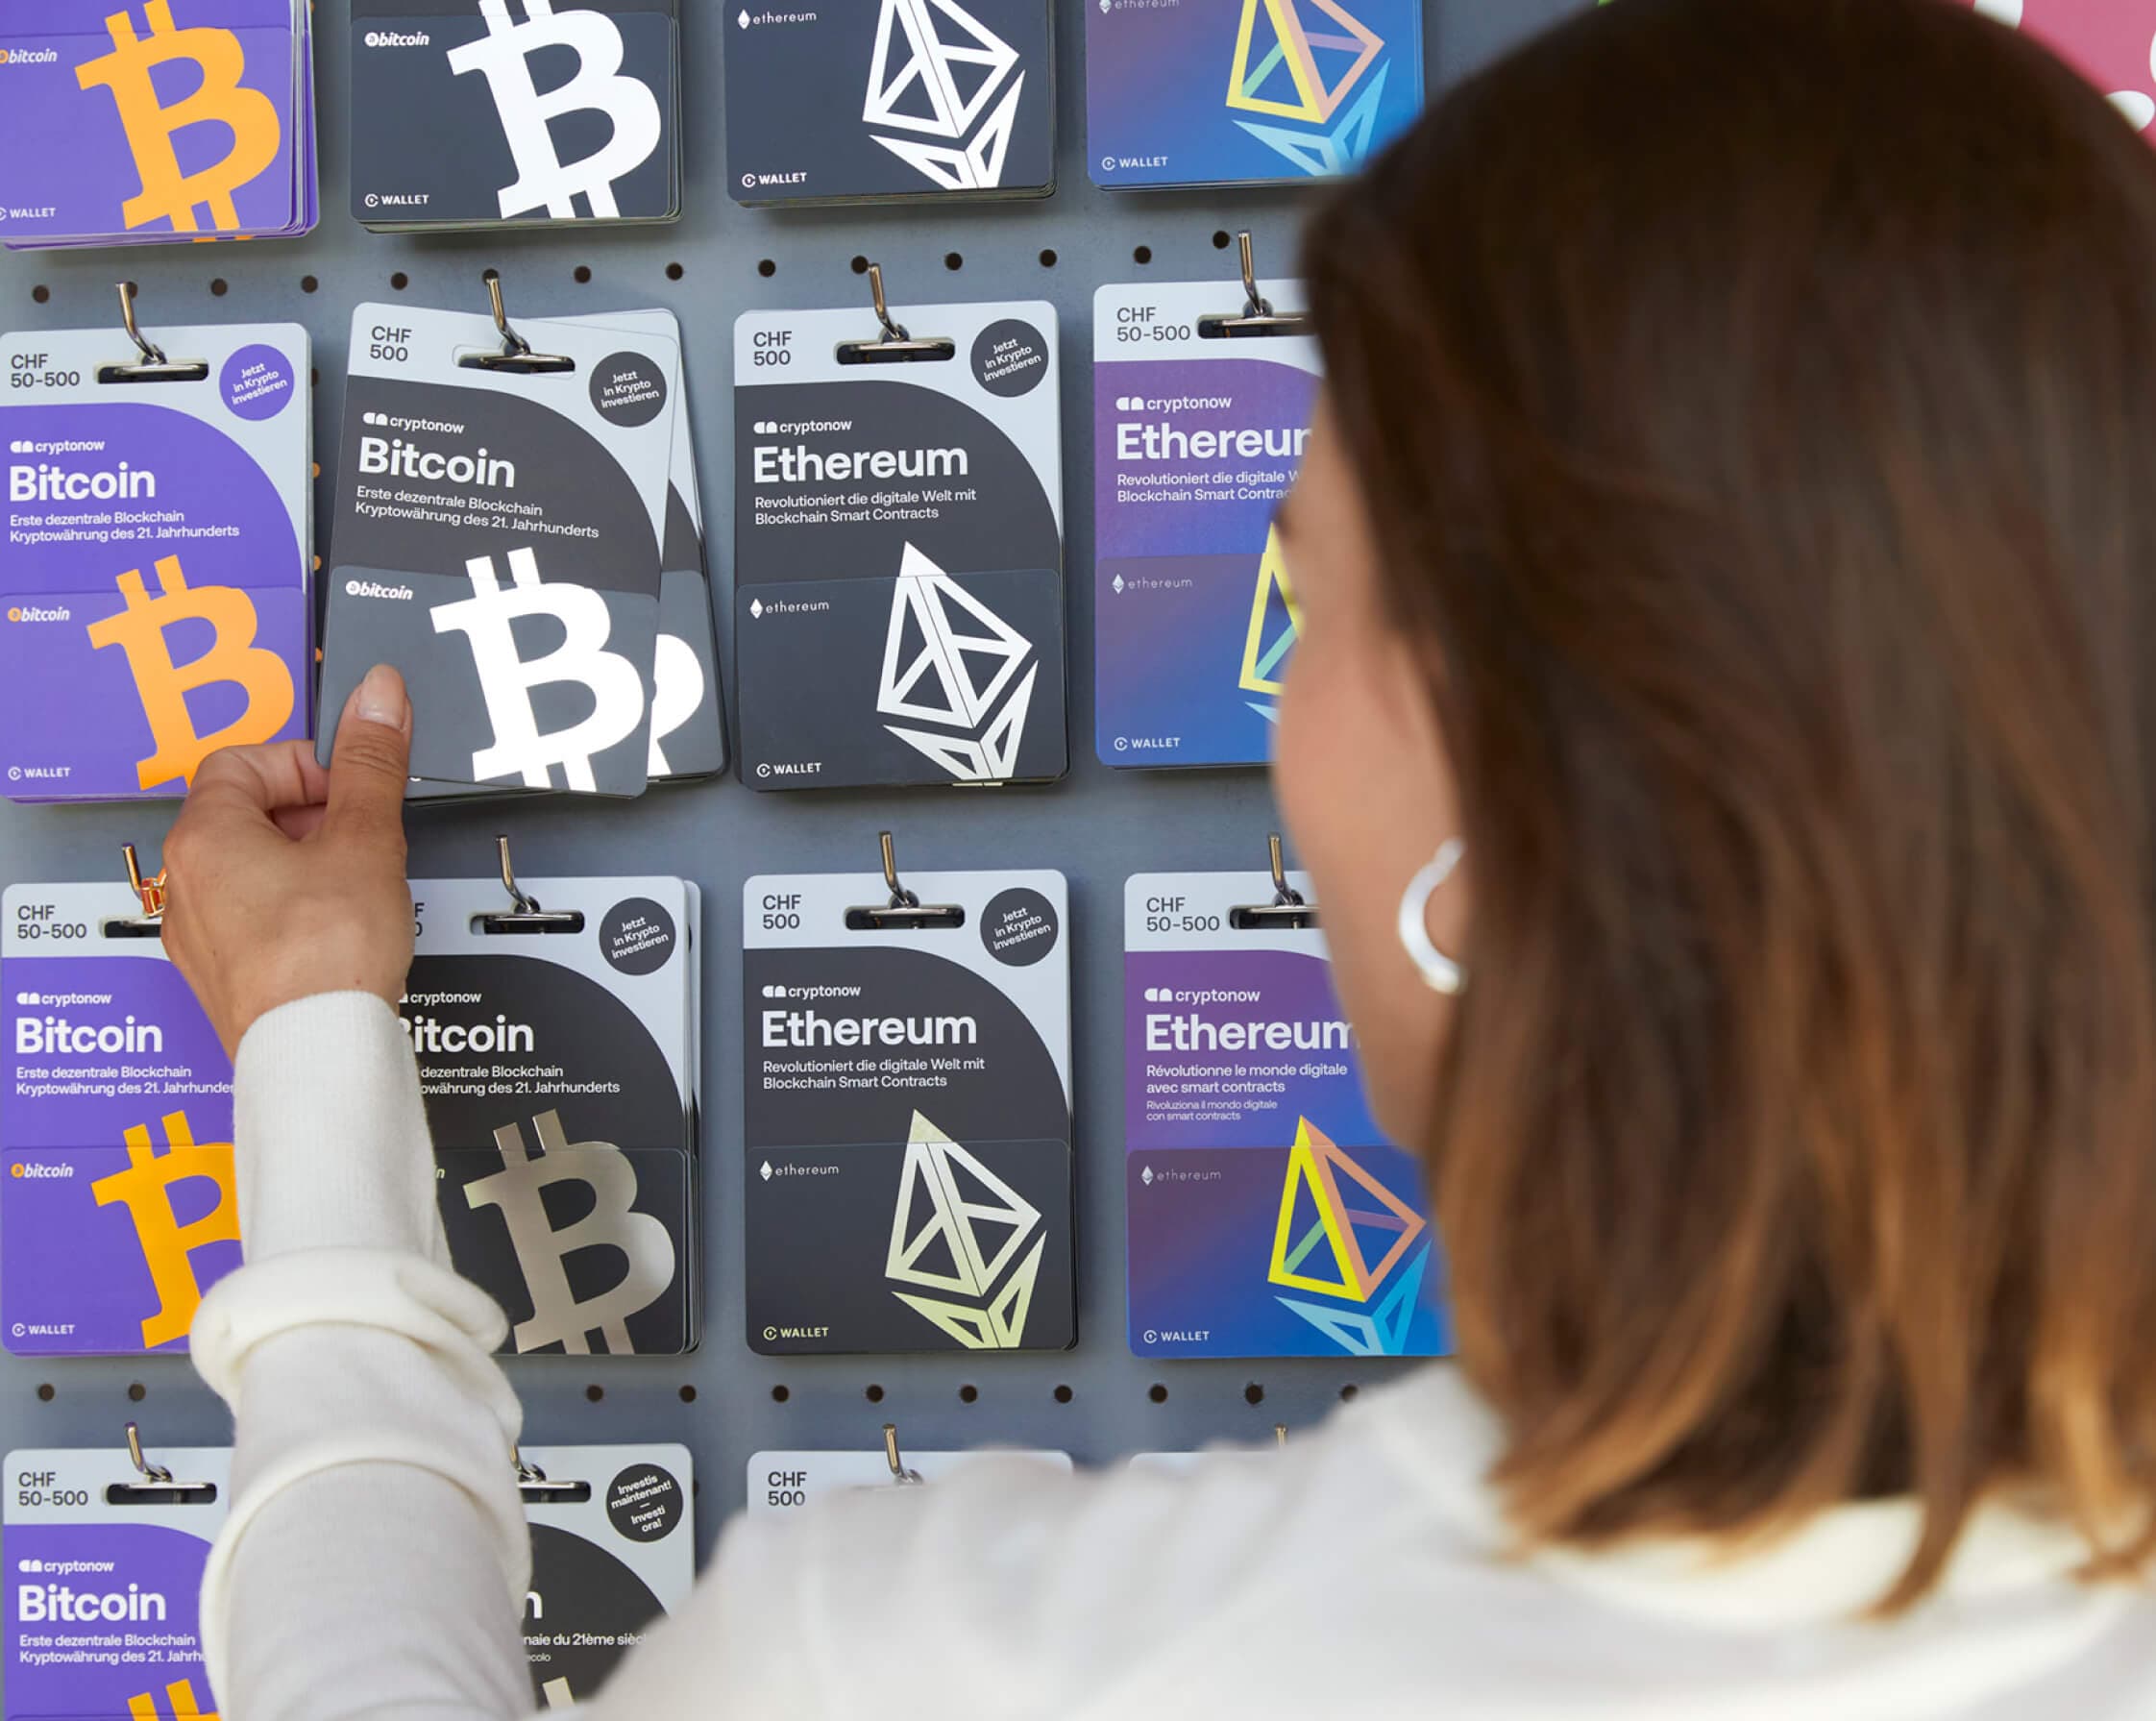 A woman selects a Cryptonow card in the store